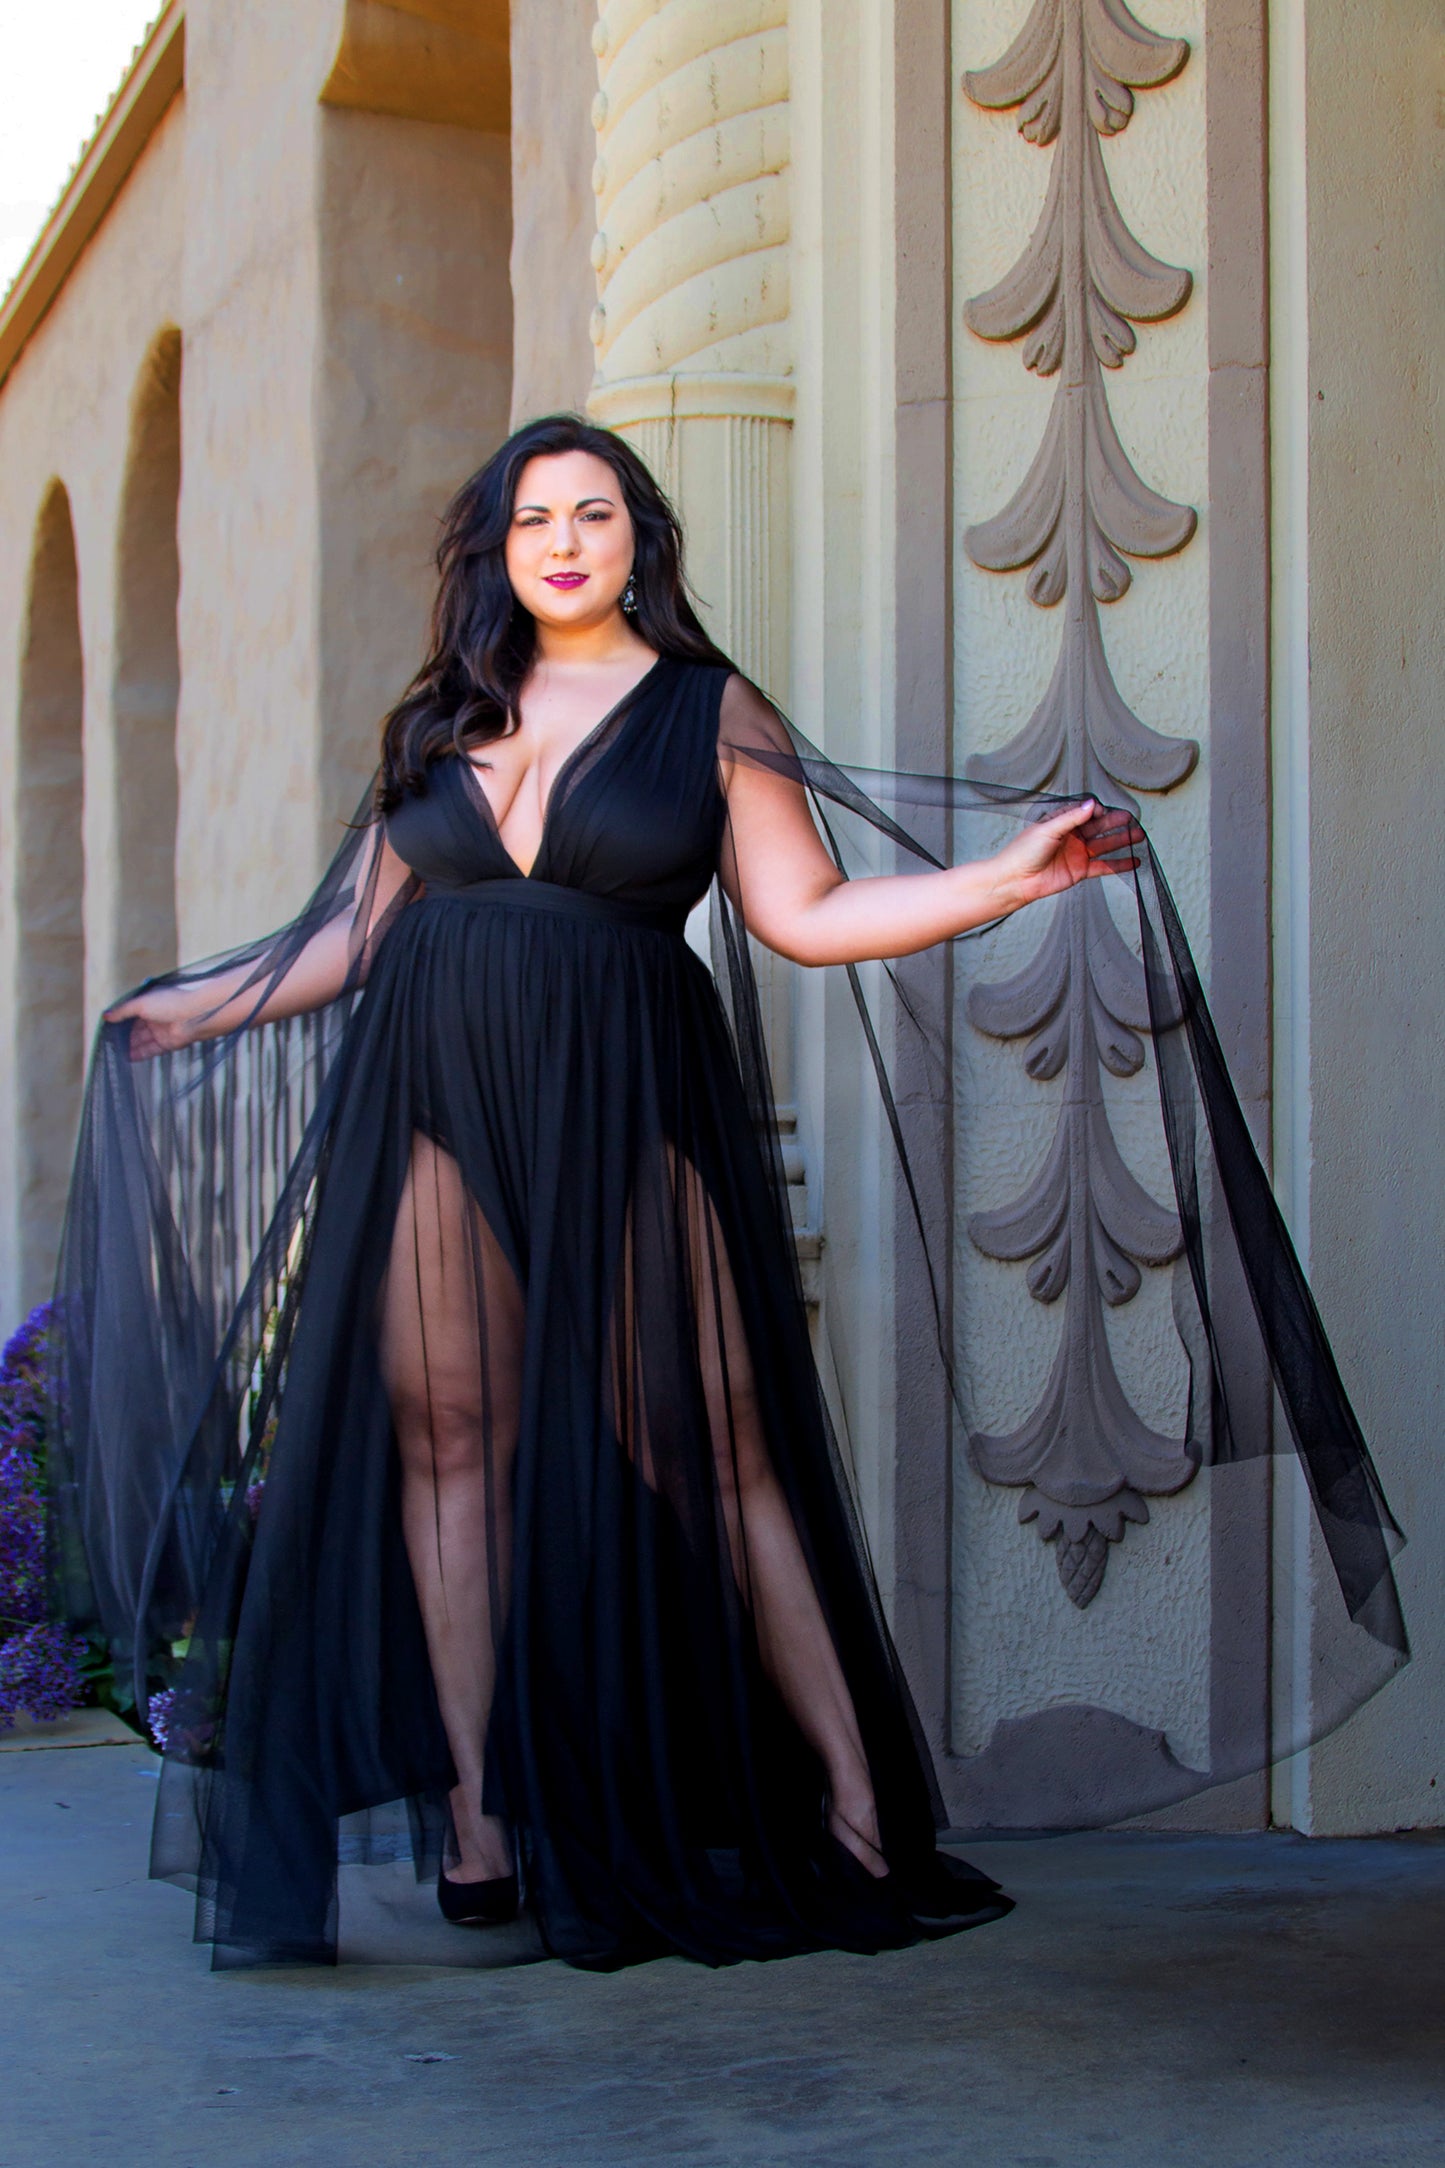 Gothic Glamour Bombshell Gown in Black with Floor Length Sheer Cape Sleeves